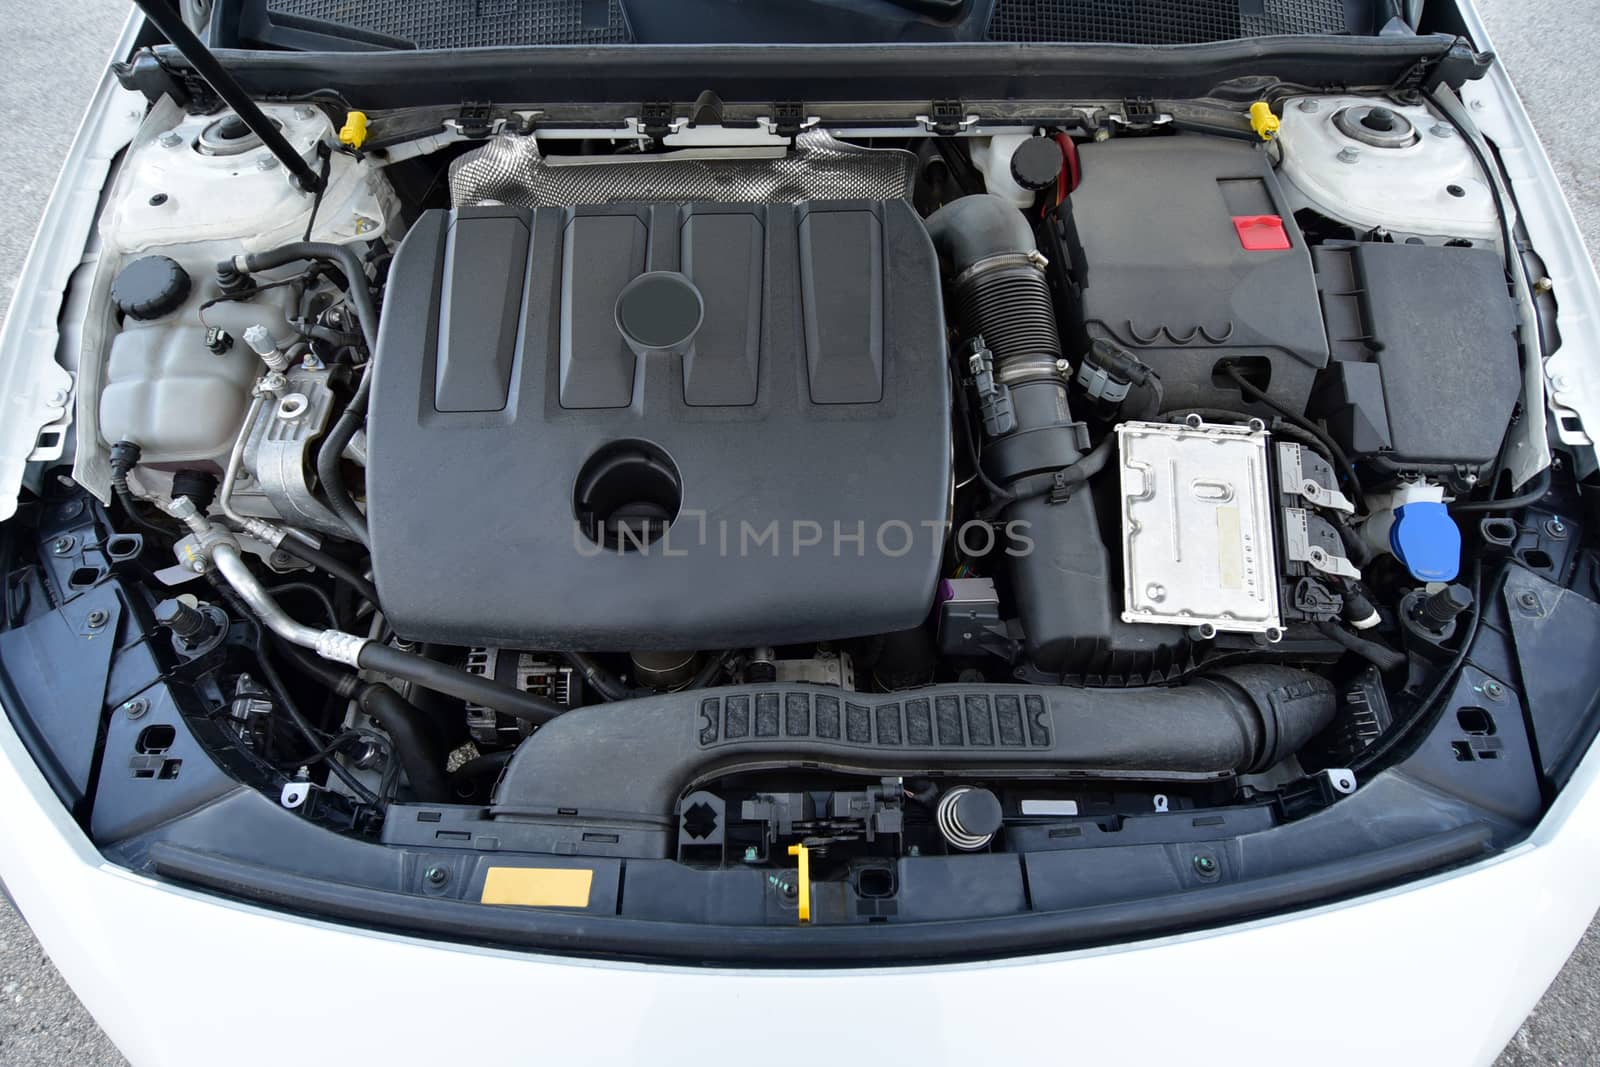 A diesel engine in a large luxury passenger car